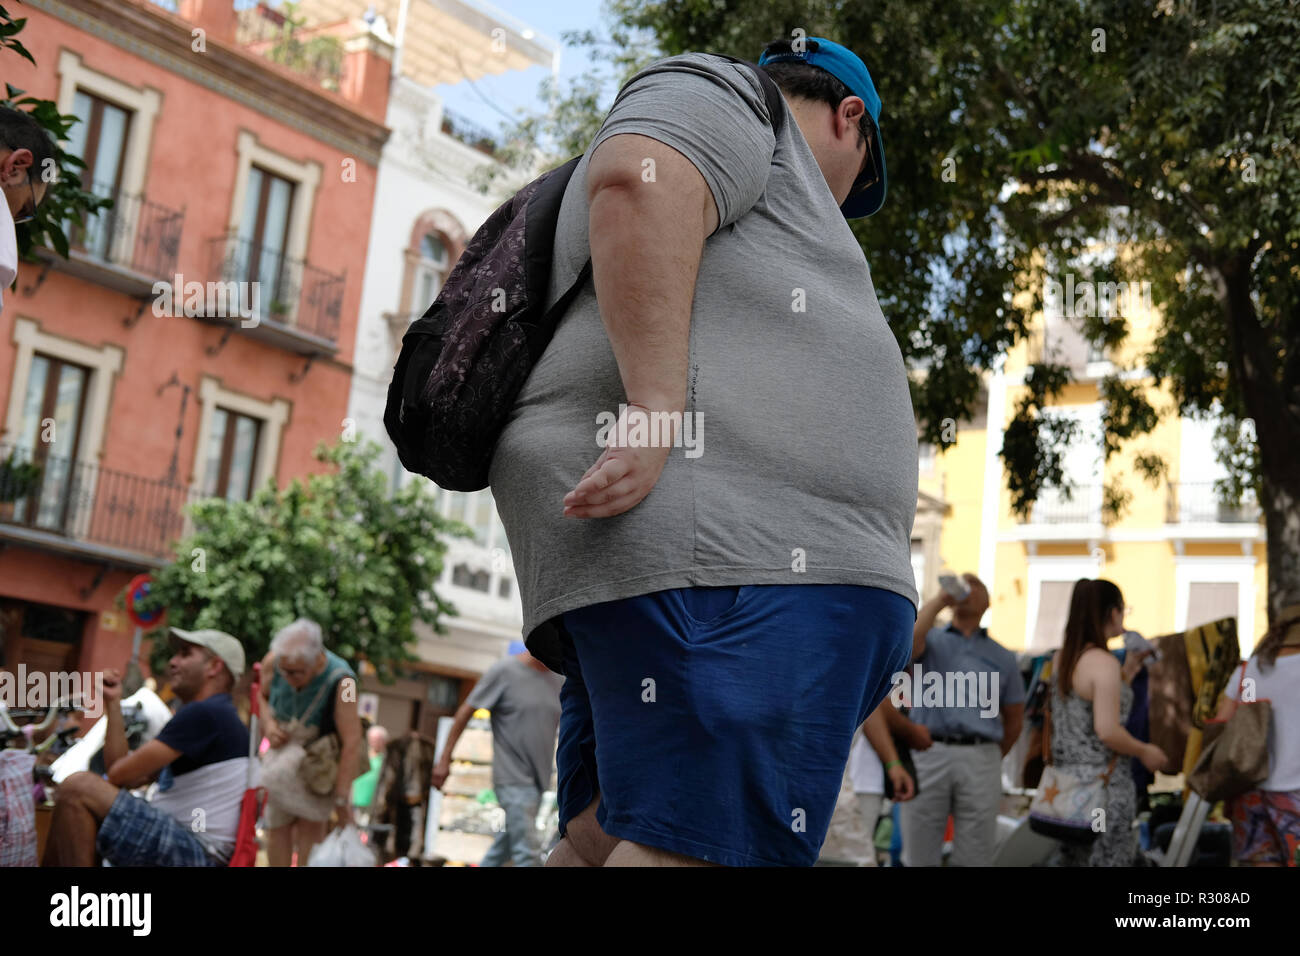 An overweight young man. in shorts. Stock Photo